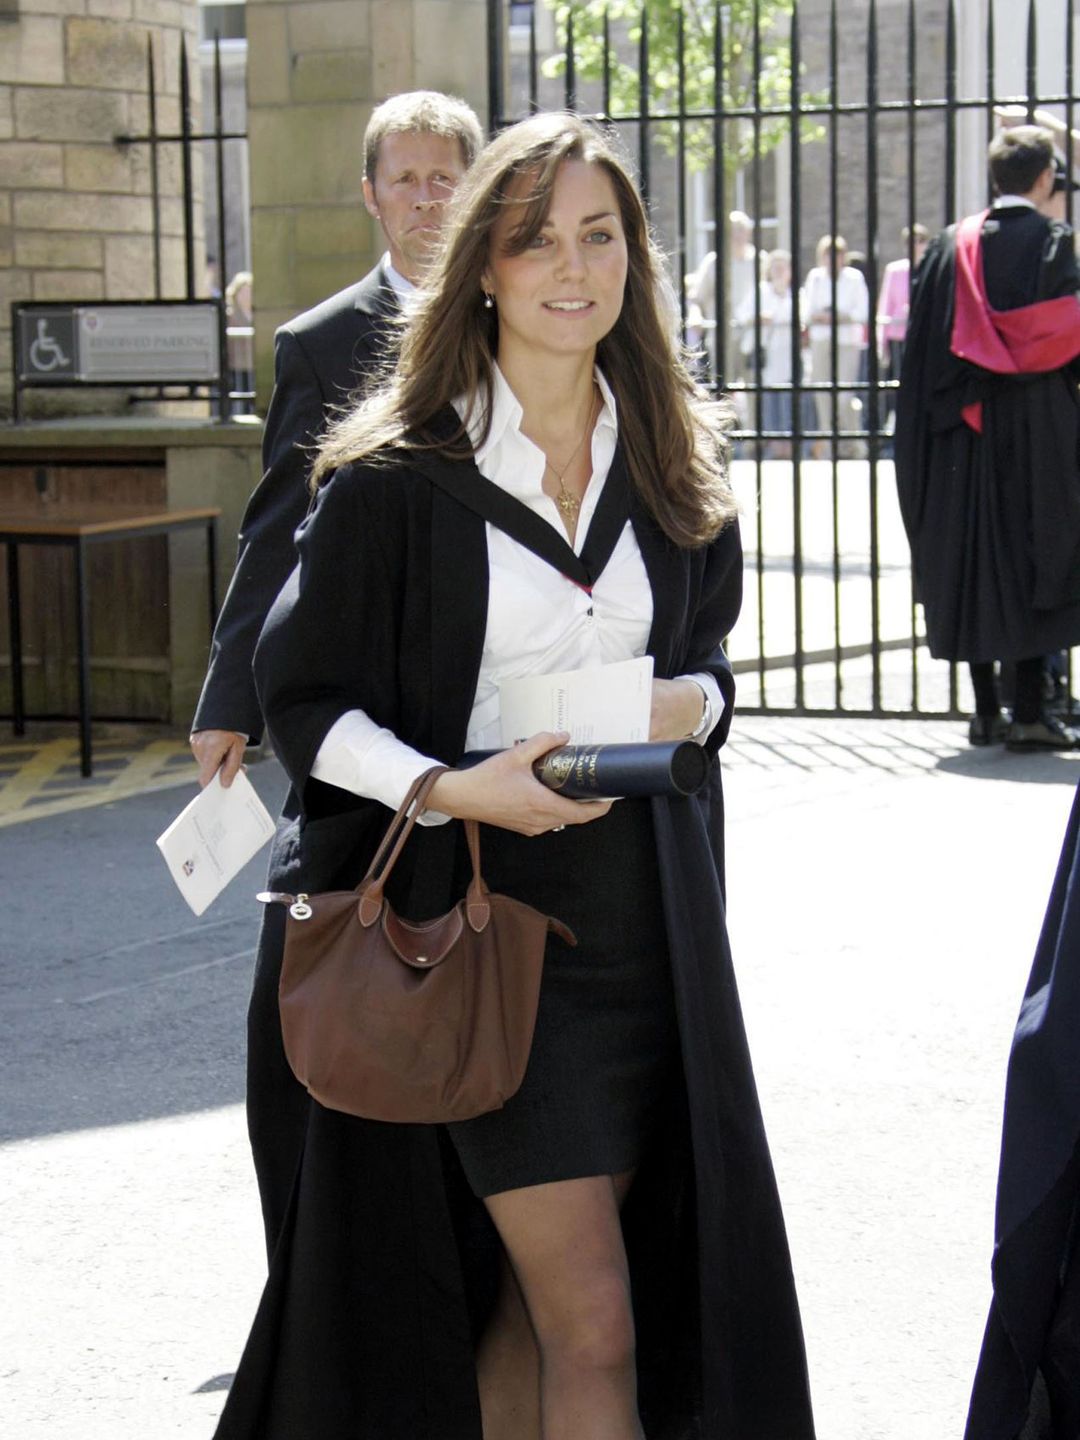 Princess Kate pictured on graduation day at St. Andrews University